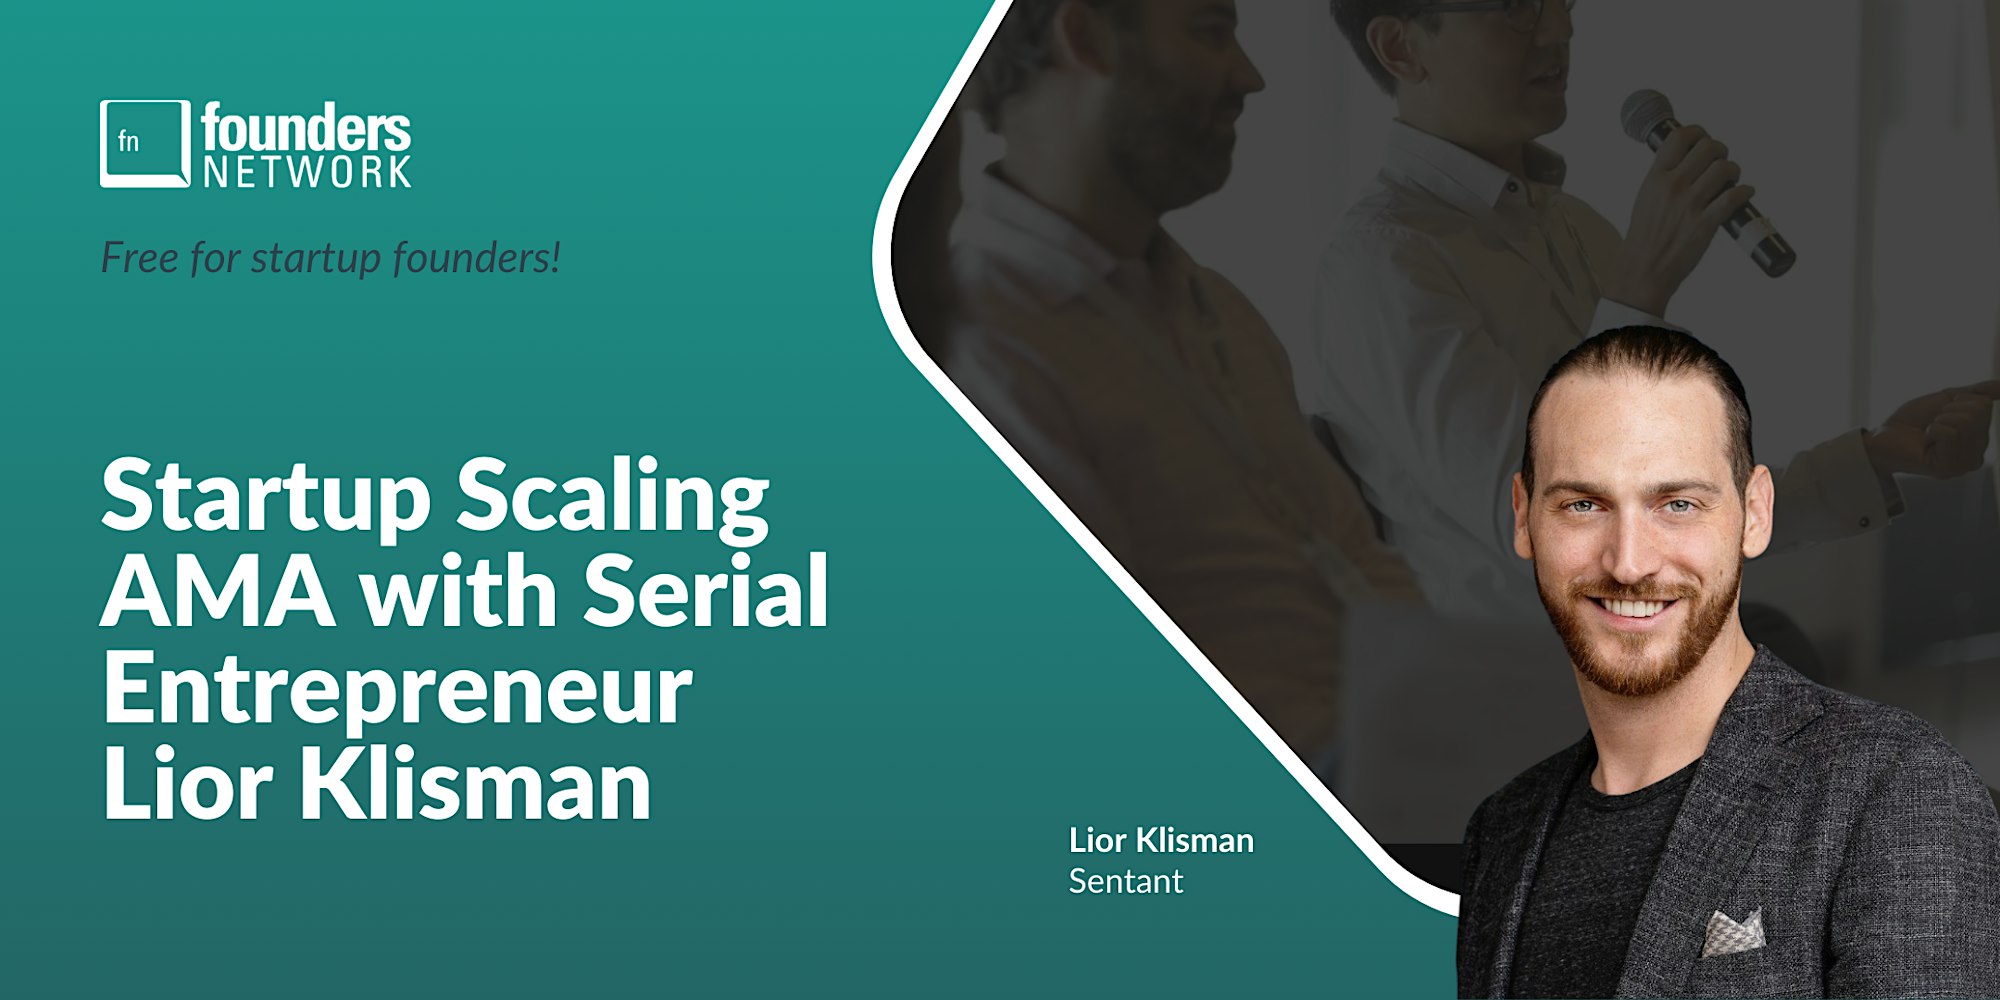 Featured image for “Startup Scaling AMA with Serial Entrepreneur Lior Klisman”